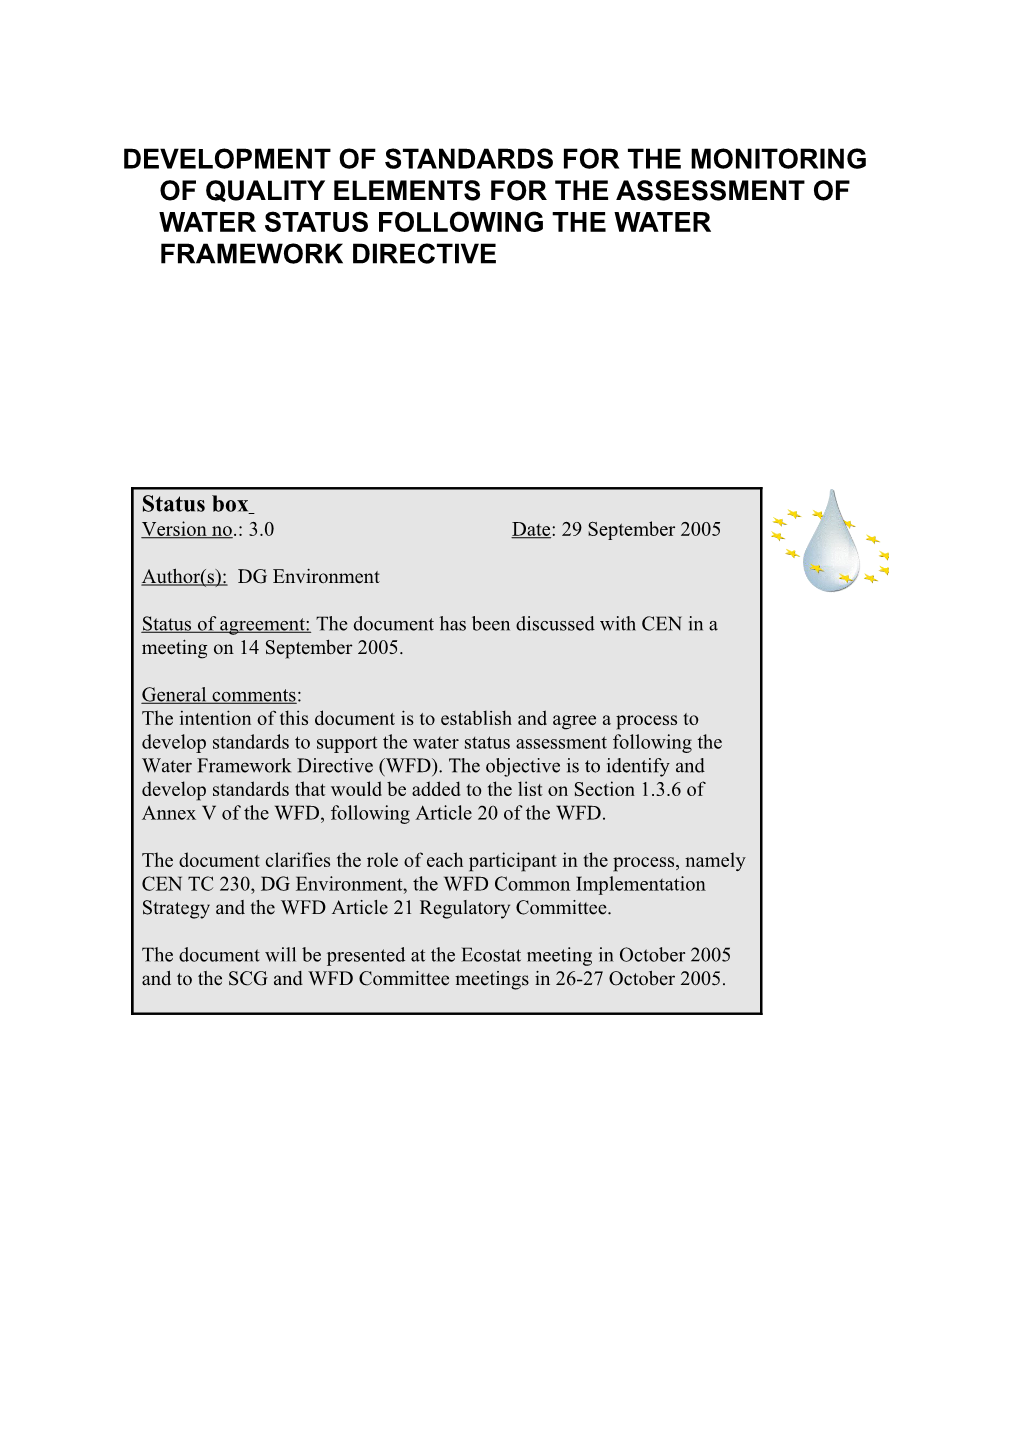 Development of Standards Supporting the Assessment of Status Following the Water Framework